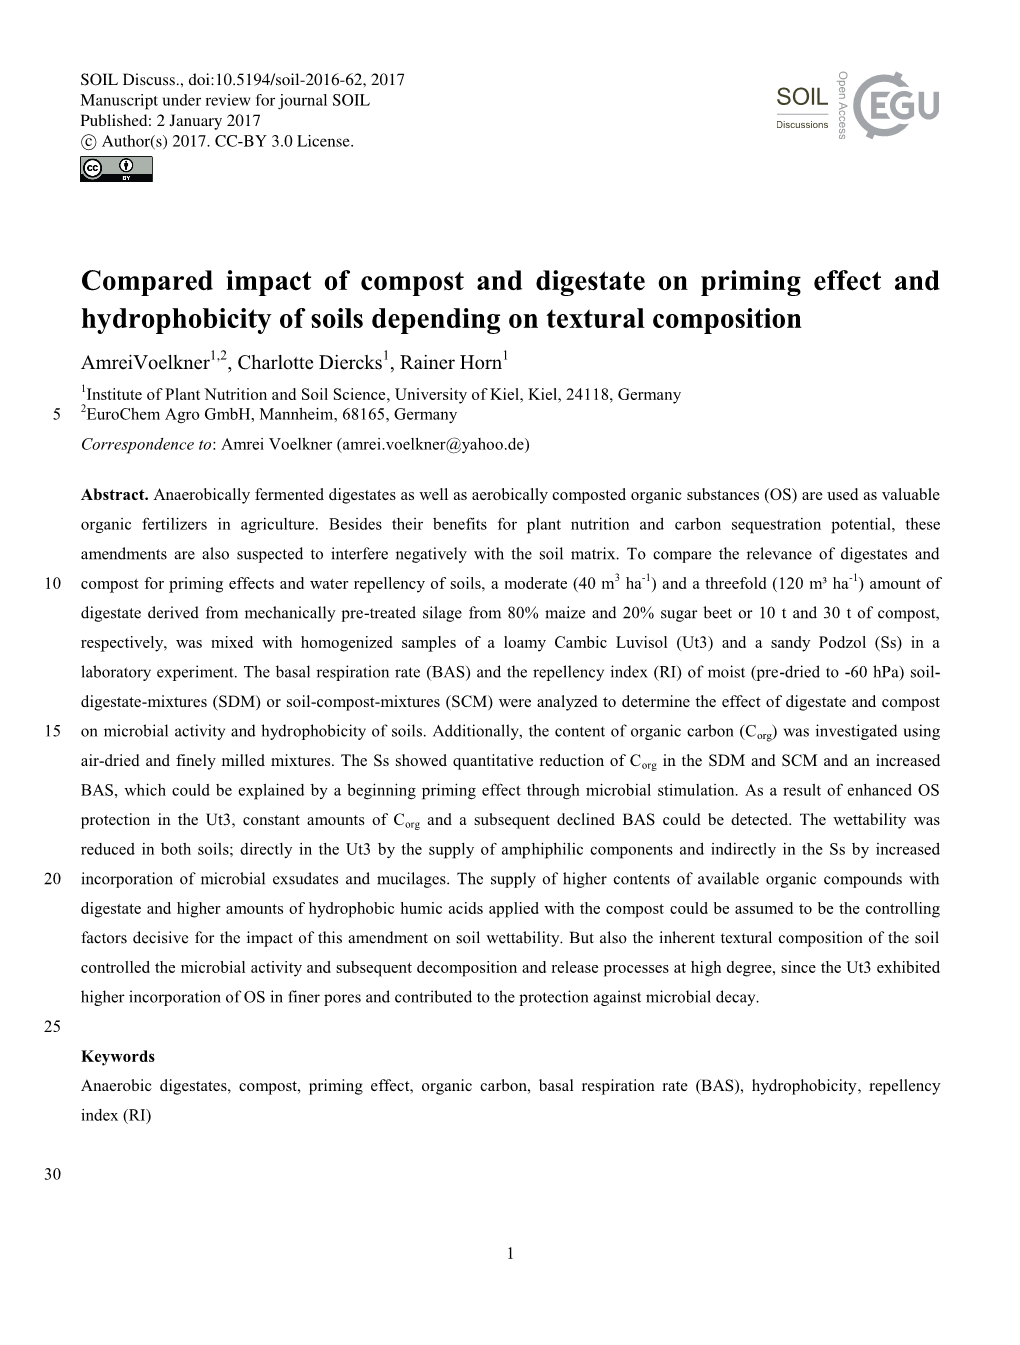 Compared Impact of Compost and Digestate on Priming Effect